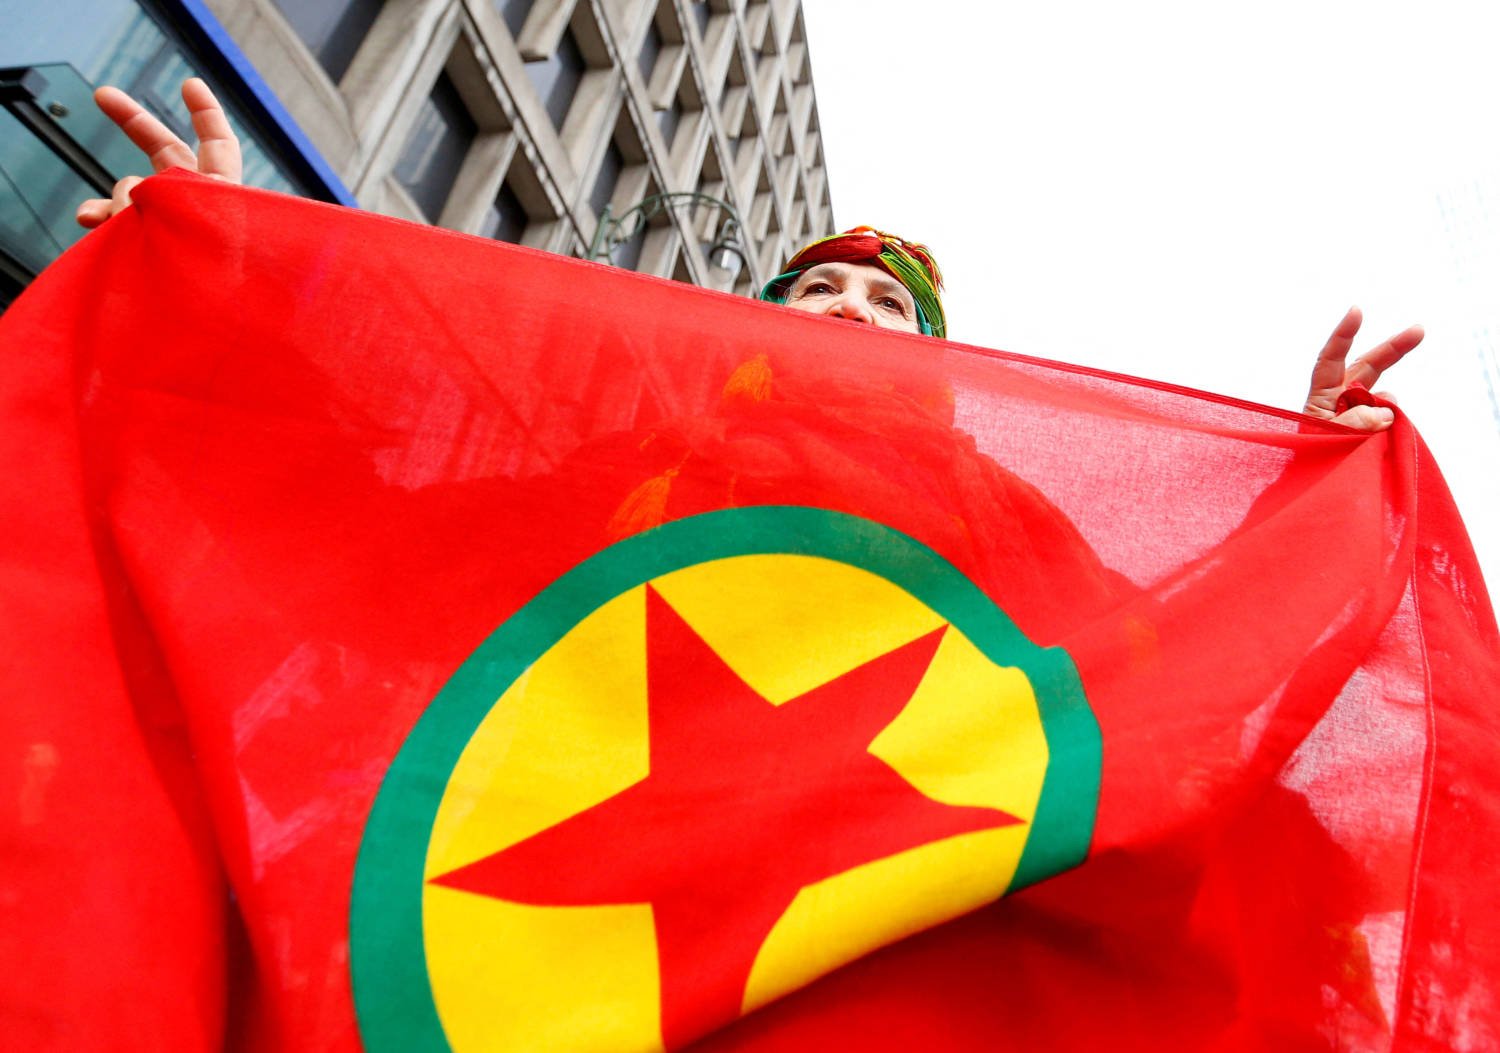 File Photo: A Woman Holds A Flag Of The Pkk During A Demonstration Against Turkish President Tayyip Erdogan In Central Brussels